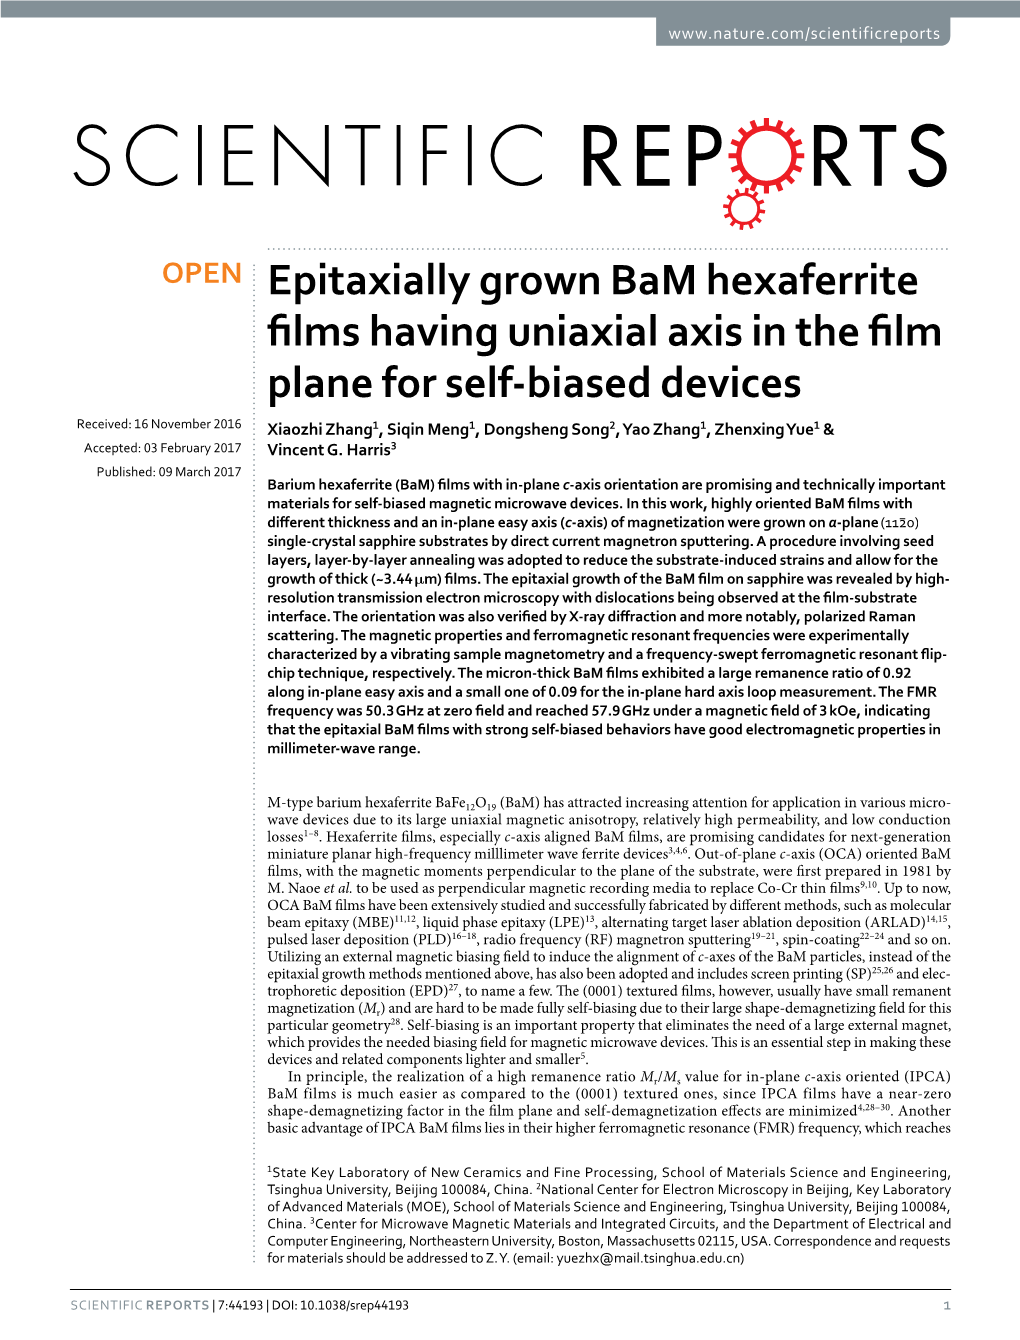 Epitaxially Grown Bam Hexaferrite Films Having Uniaxial Axis in the Film